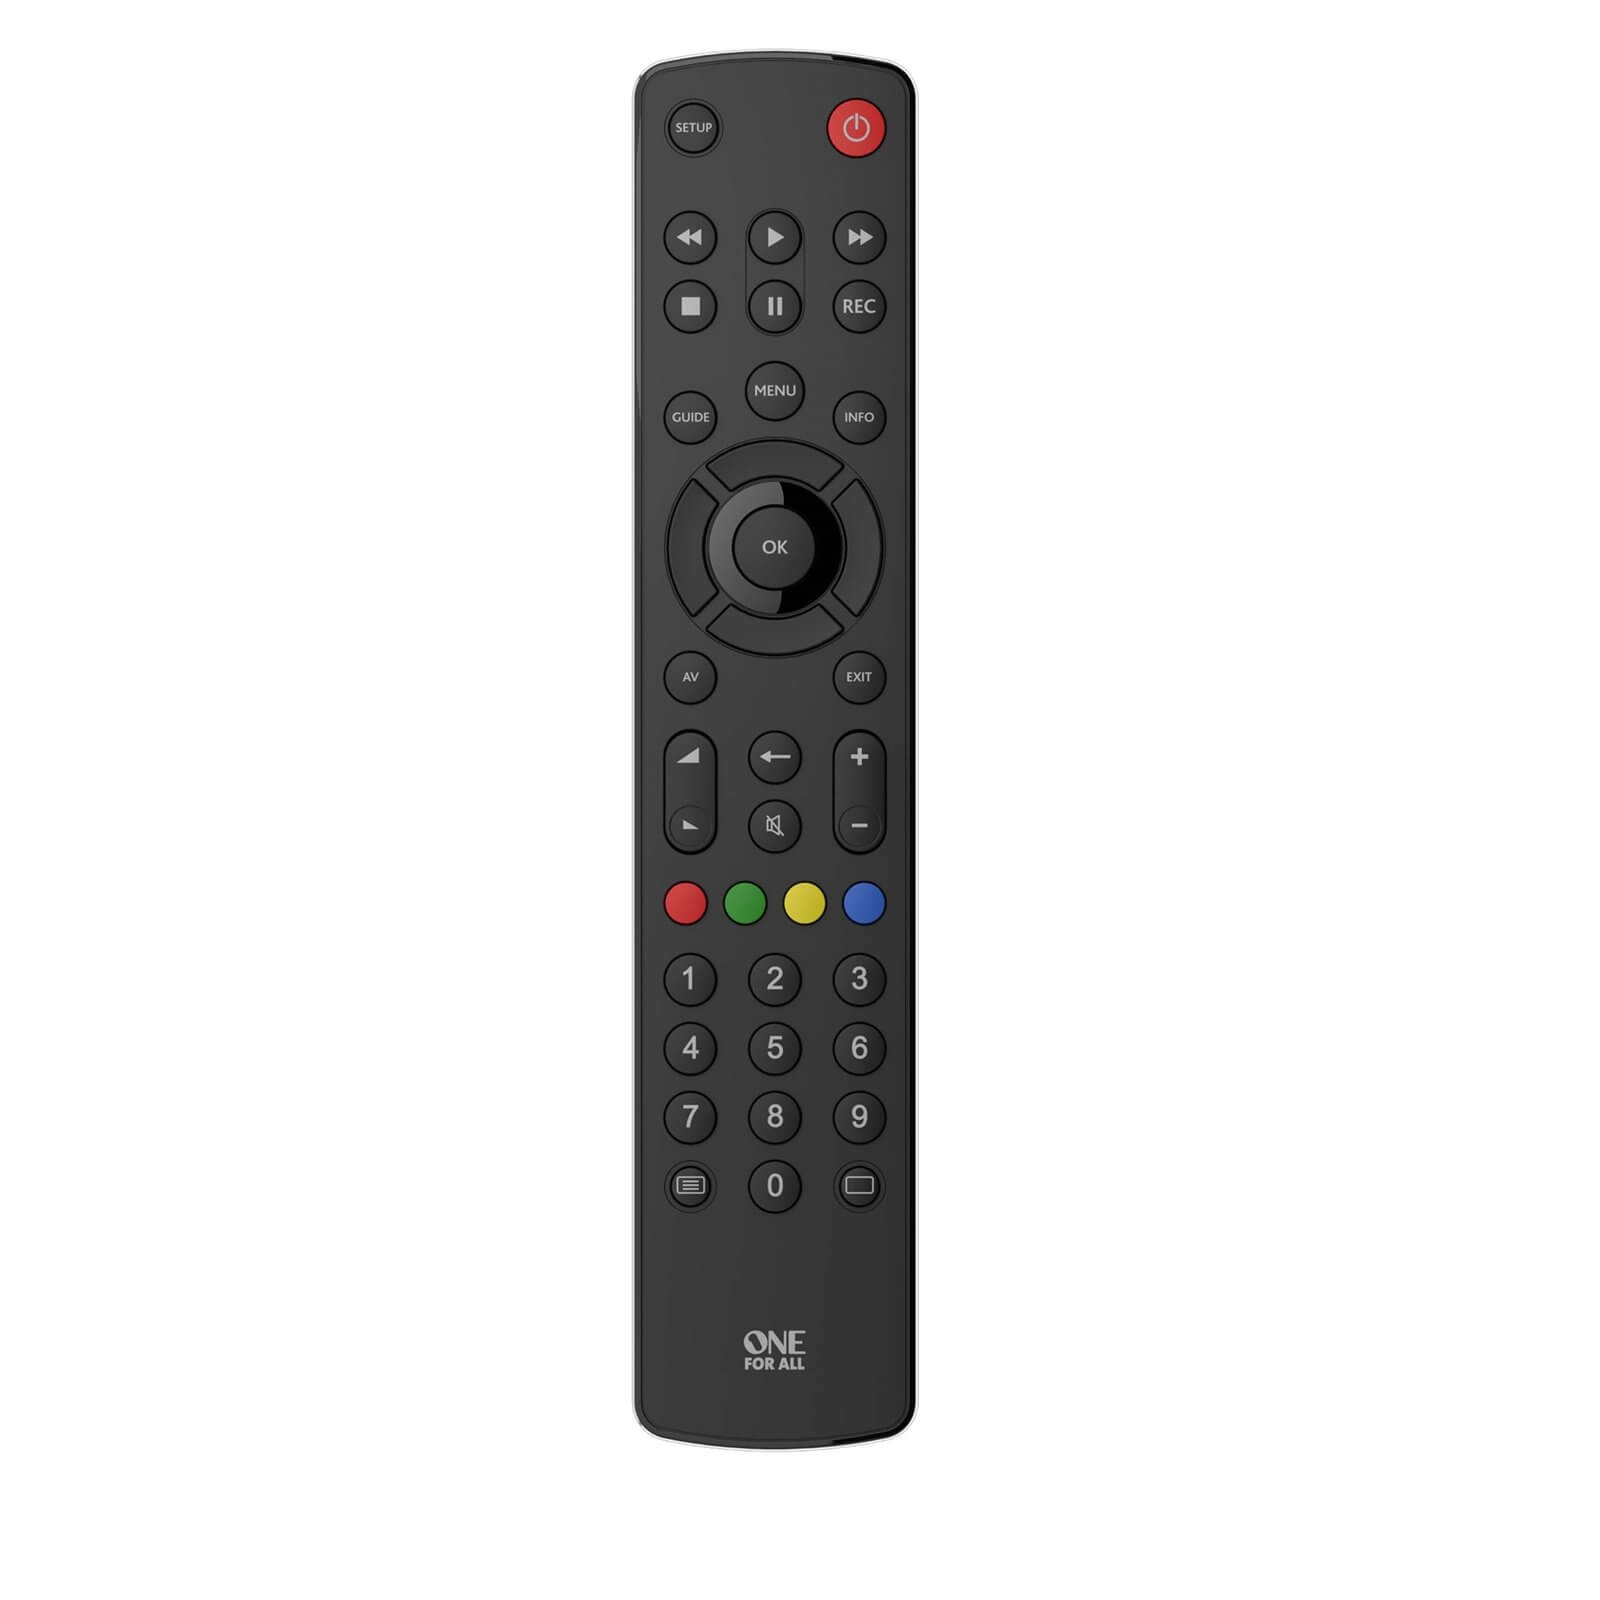 One For All URC1210 Universal Remote control